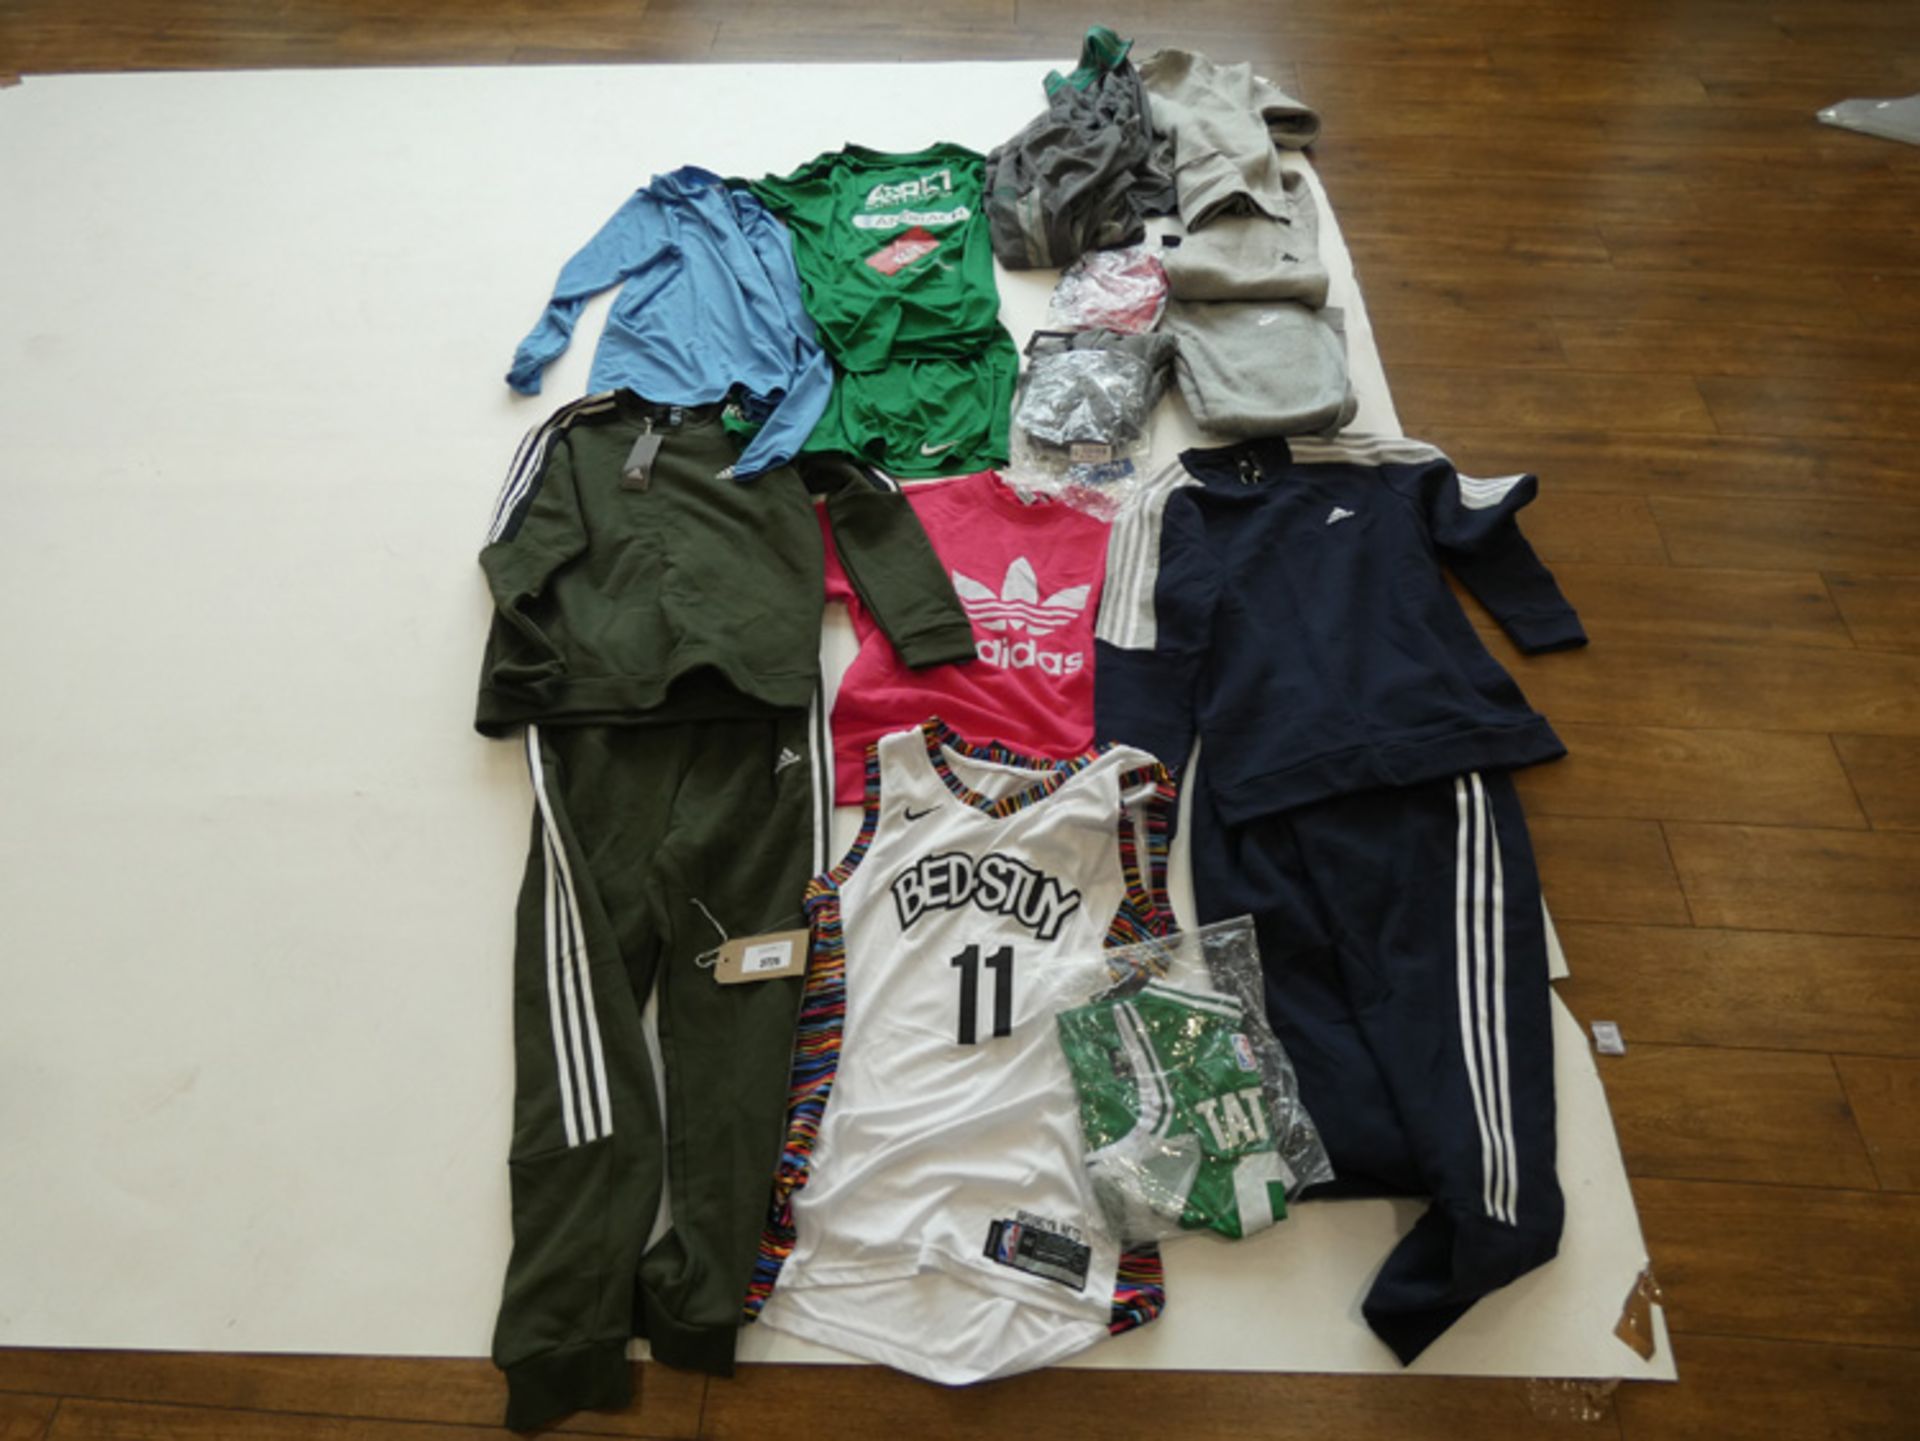 Collection of Adidas, Nike, Boss sportswear including track suits, tops, etc